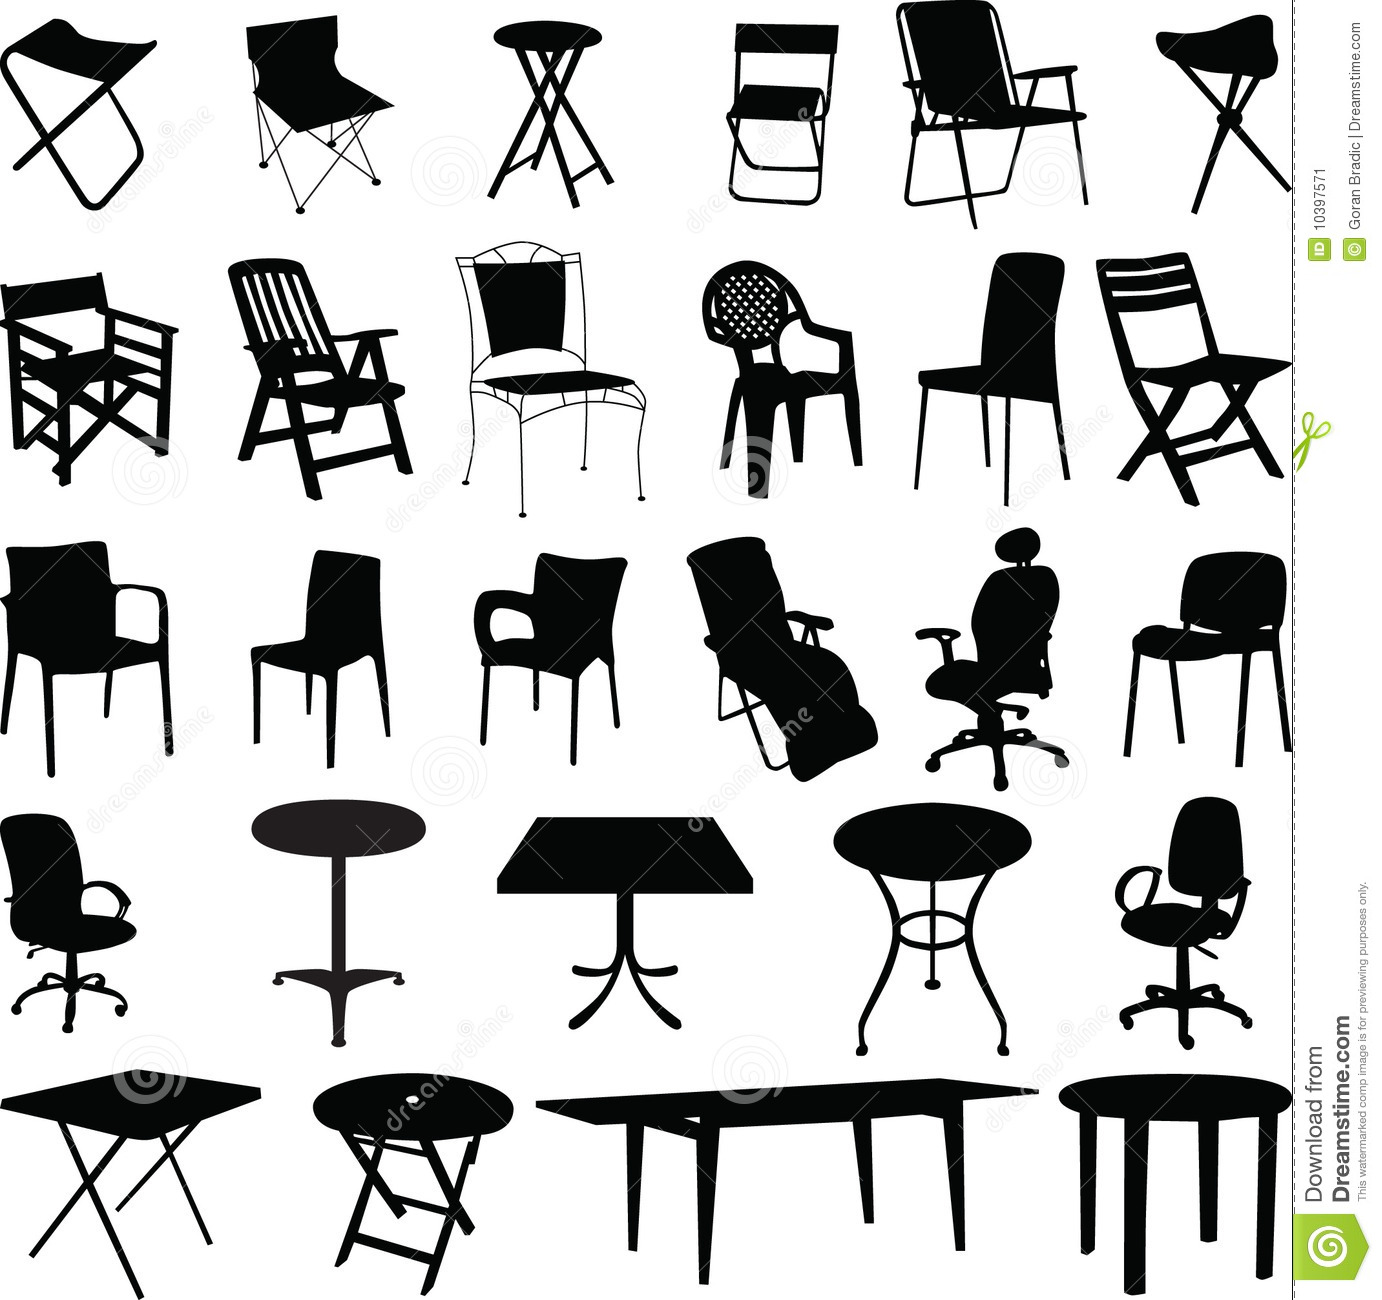 Tables and Chairs Vector Silhouettes